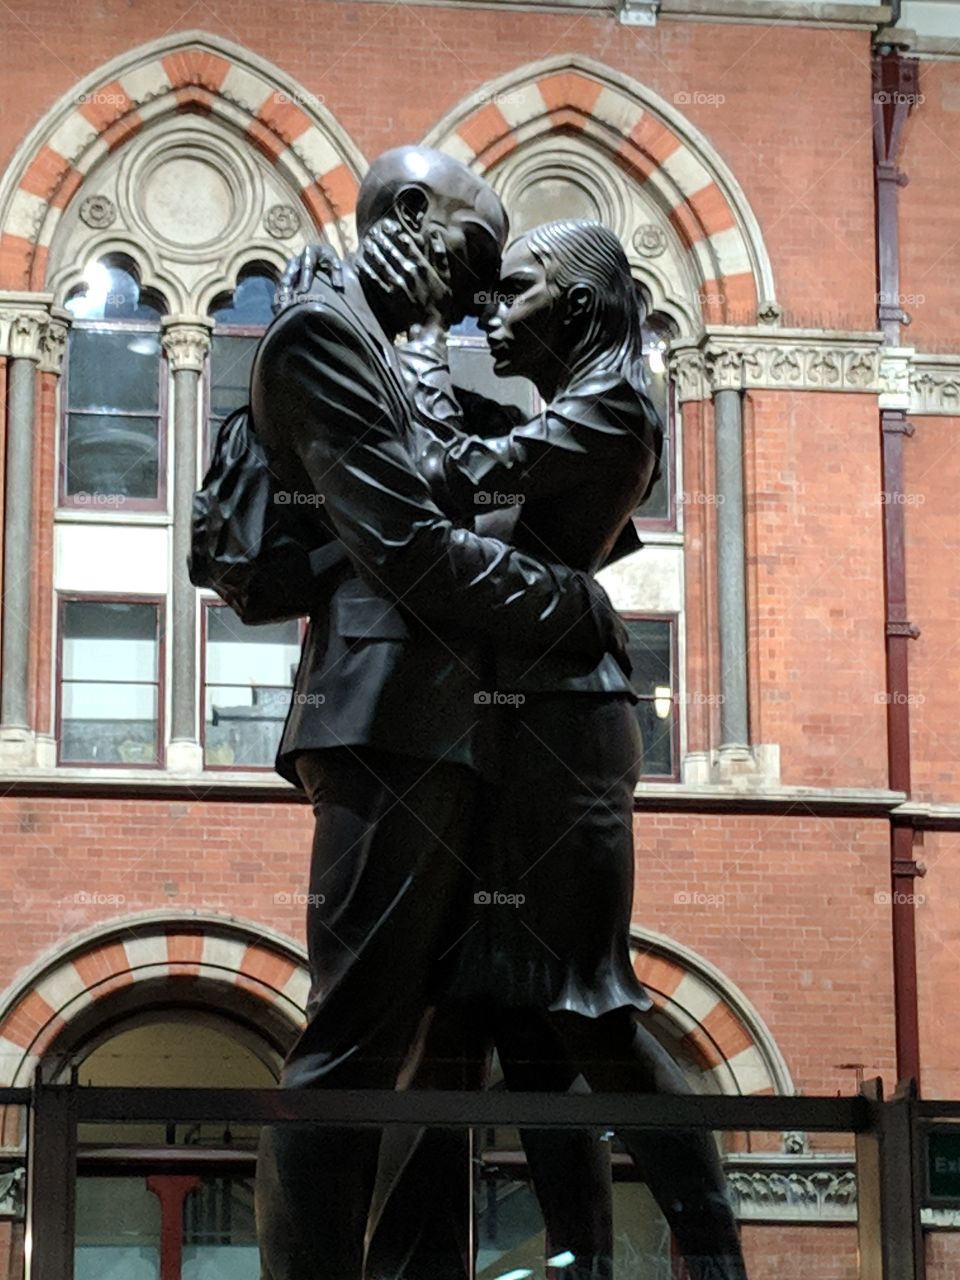 Statue at London Train station